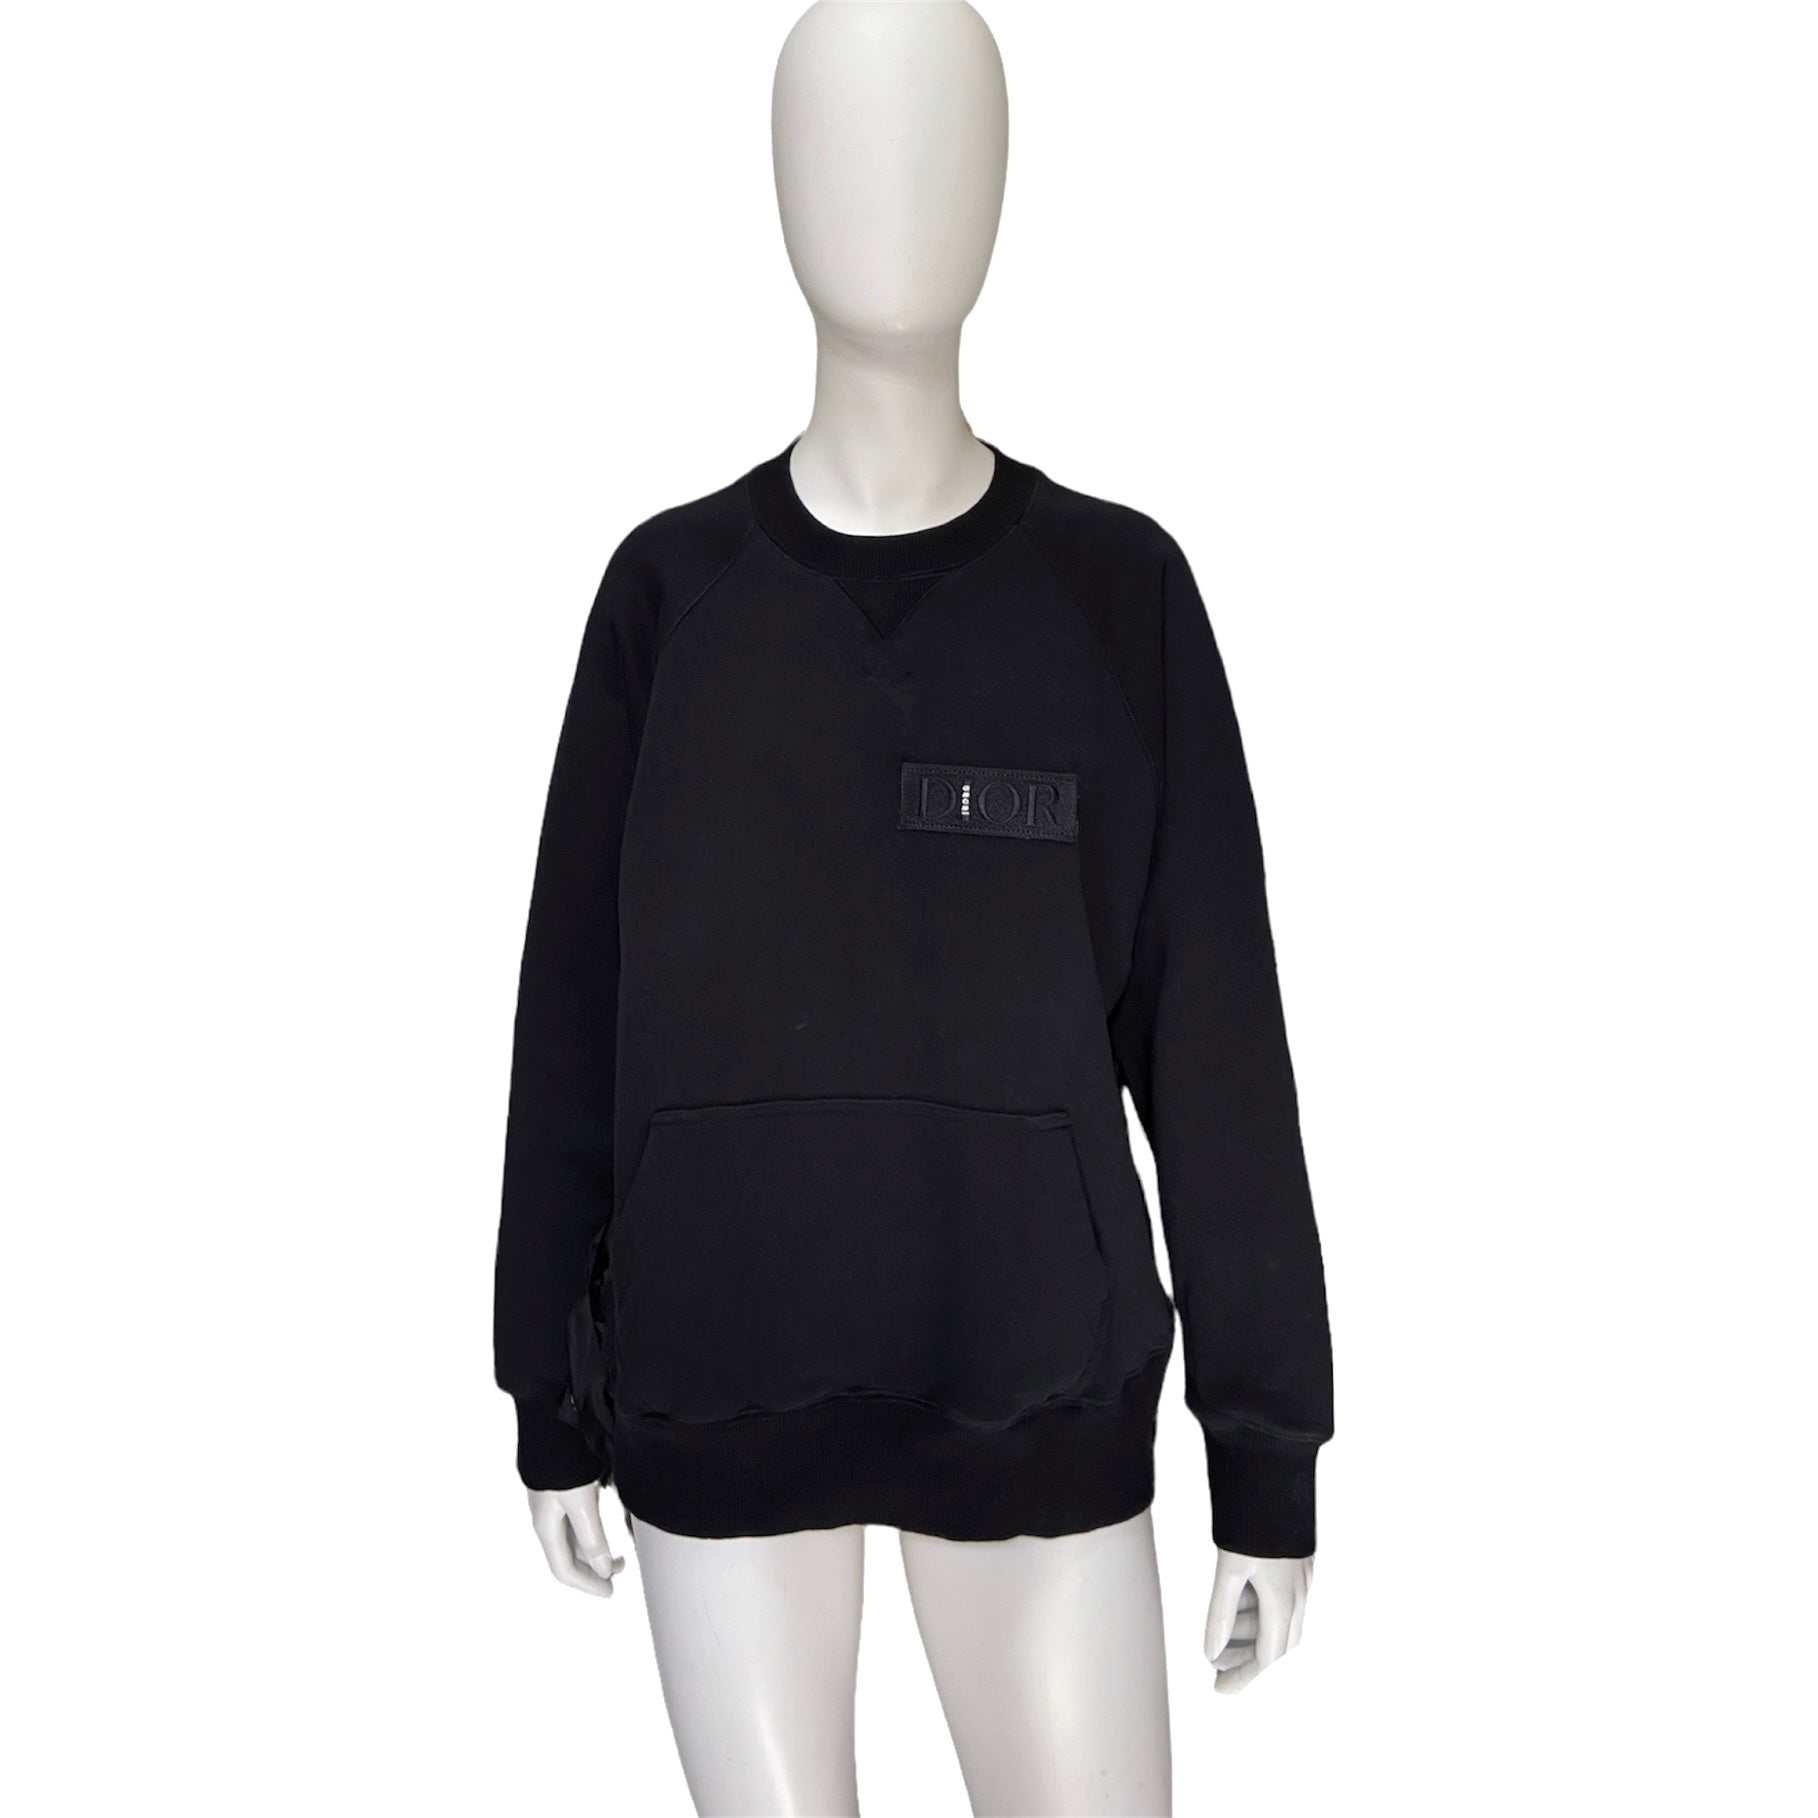 Dior x Sacai capsule logo sweater with side zippers – Dusty Archive